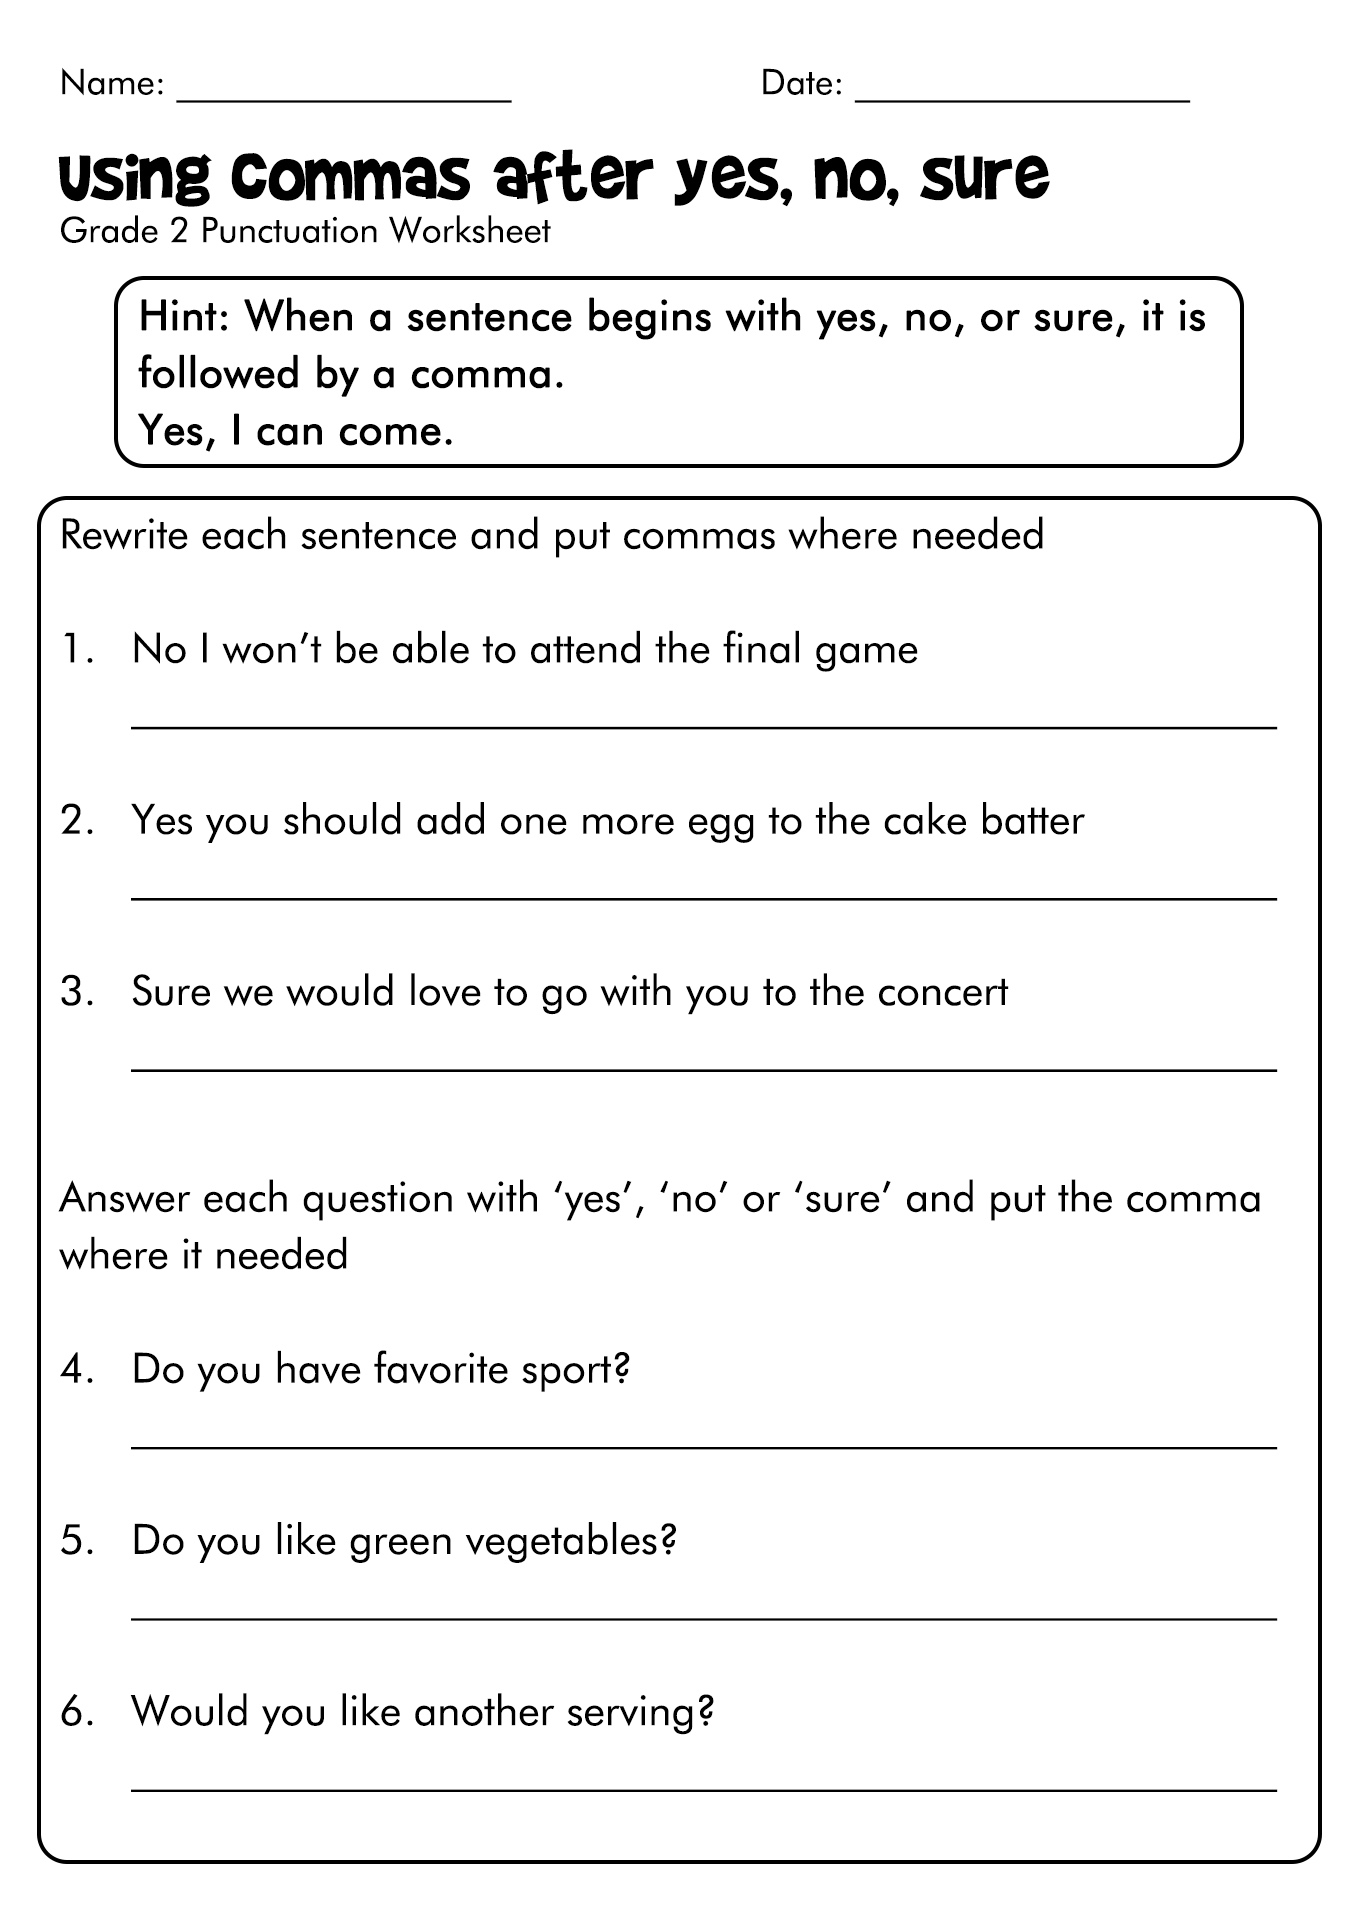 20 Best Images of Punctuation Worksheets For Grade 5 5th Grade